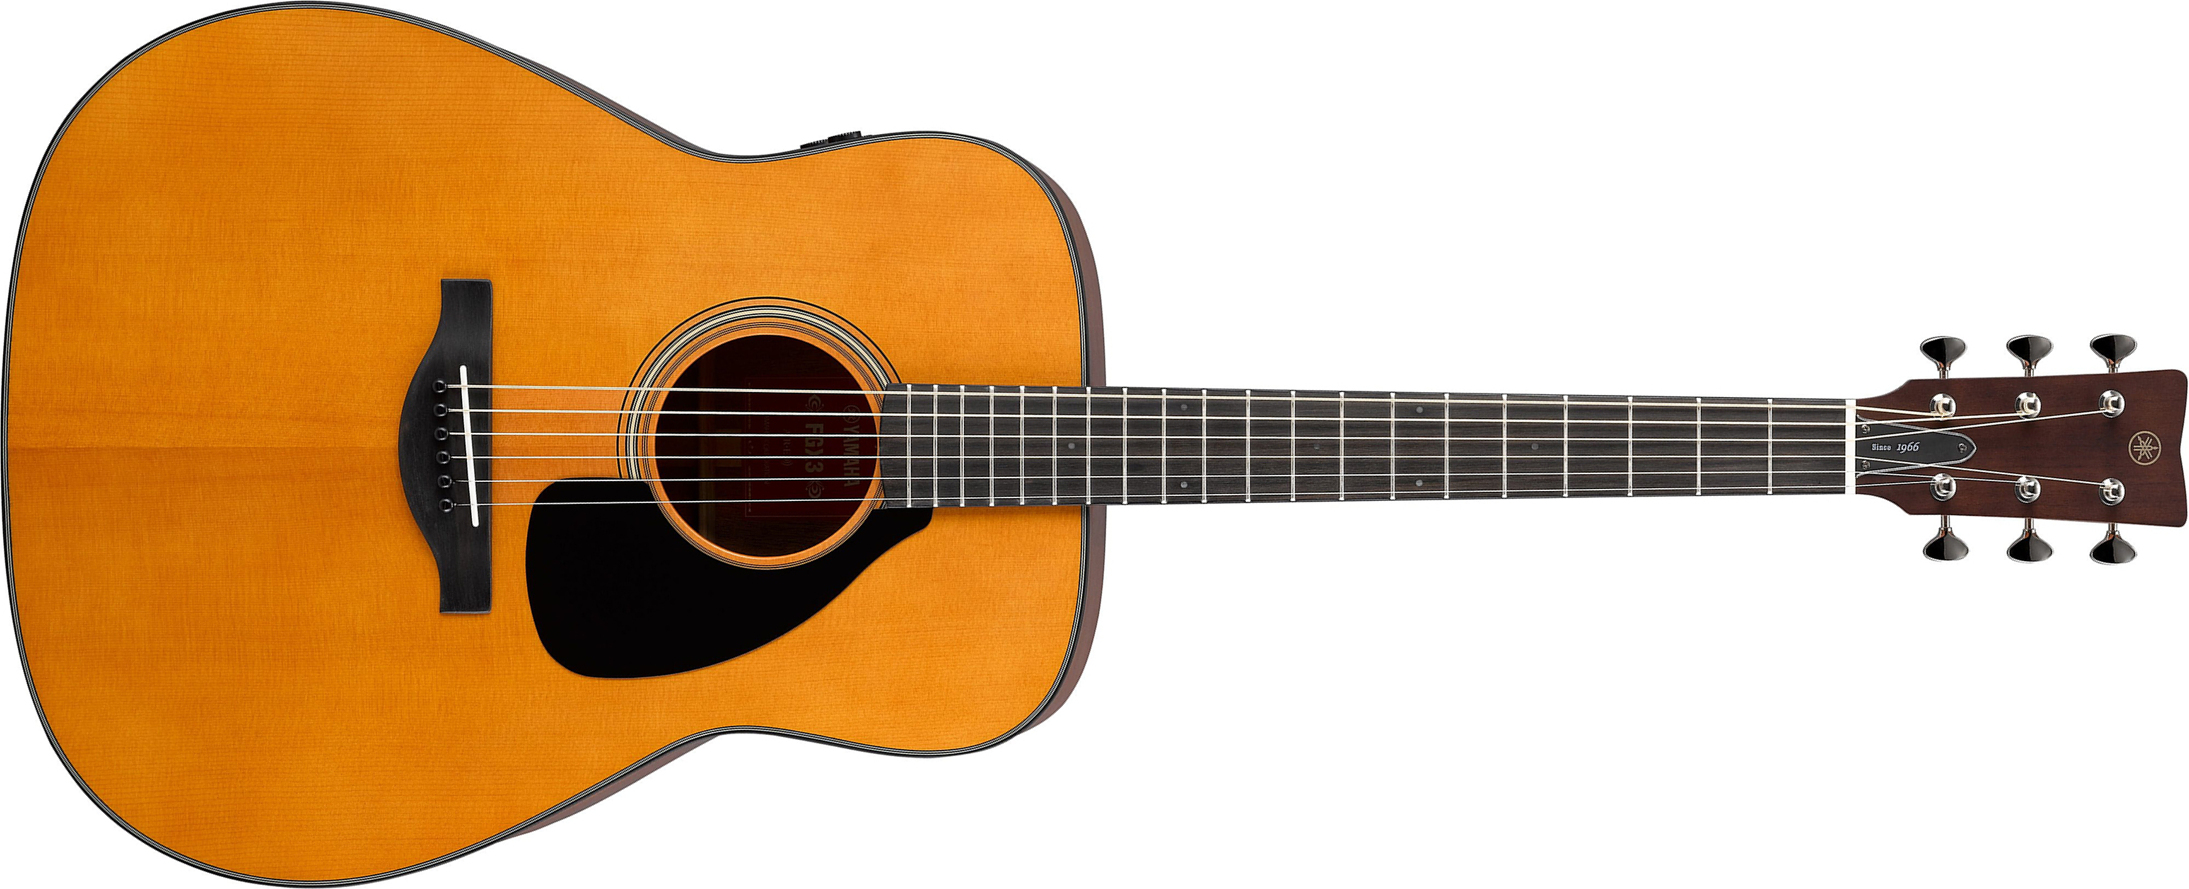 Yamaha Fgx3 Red Label Dreadnought Epicea Palissandre Eb - Heritage Natural - Westerngitaar & electro - Main picture